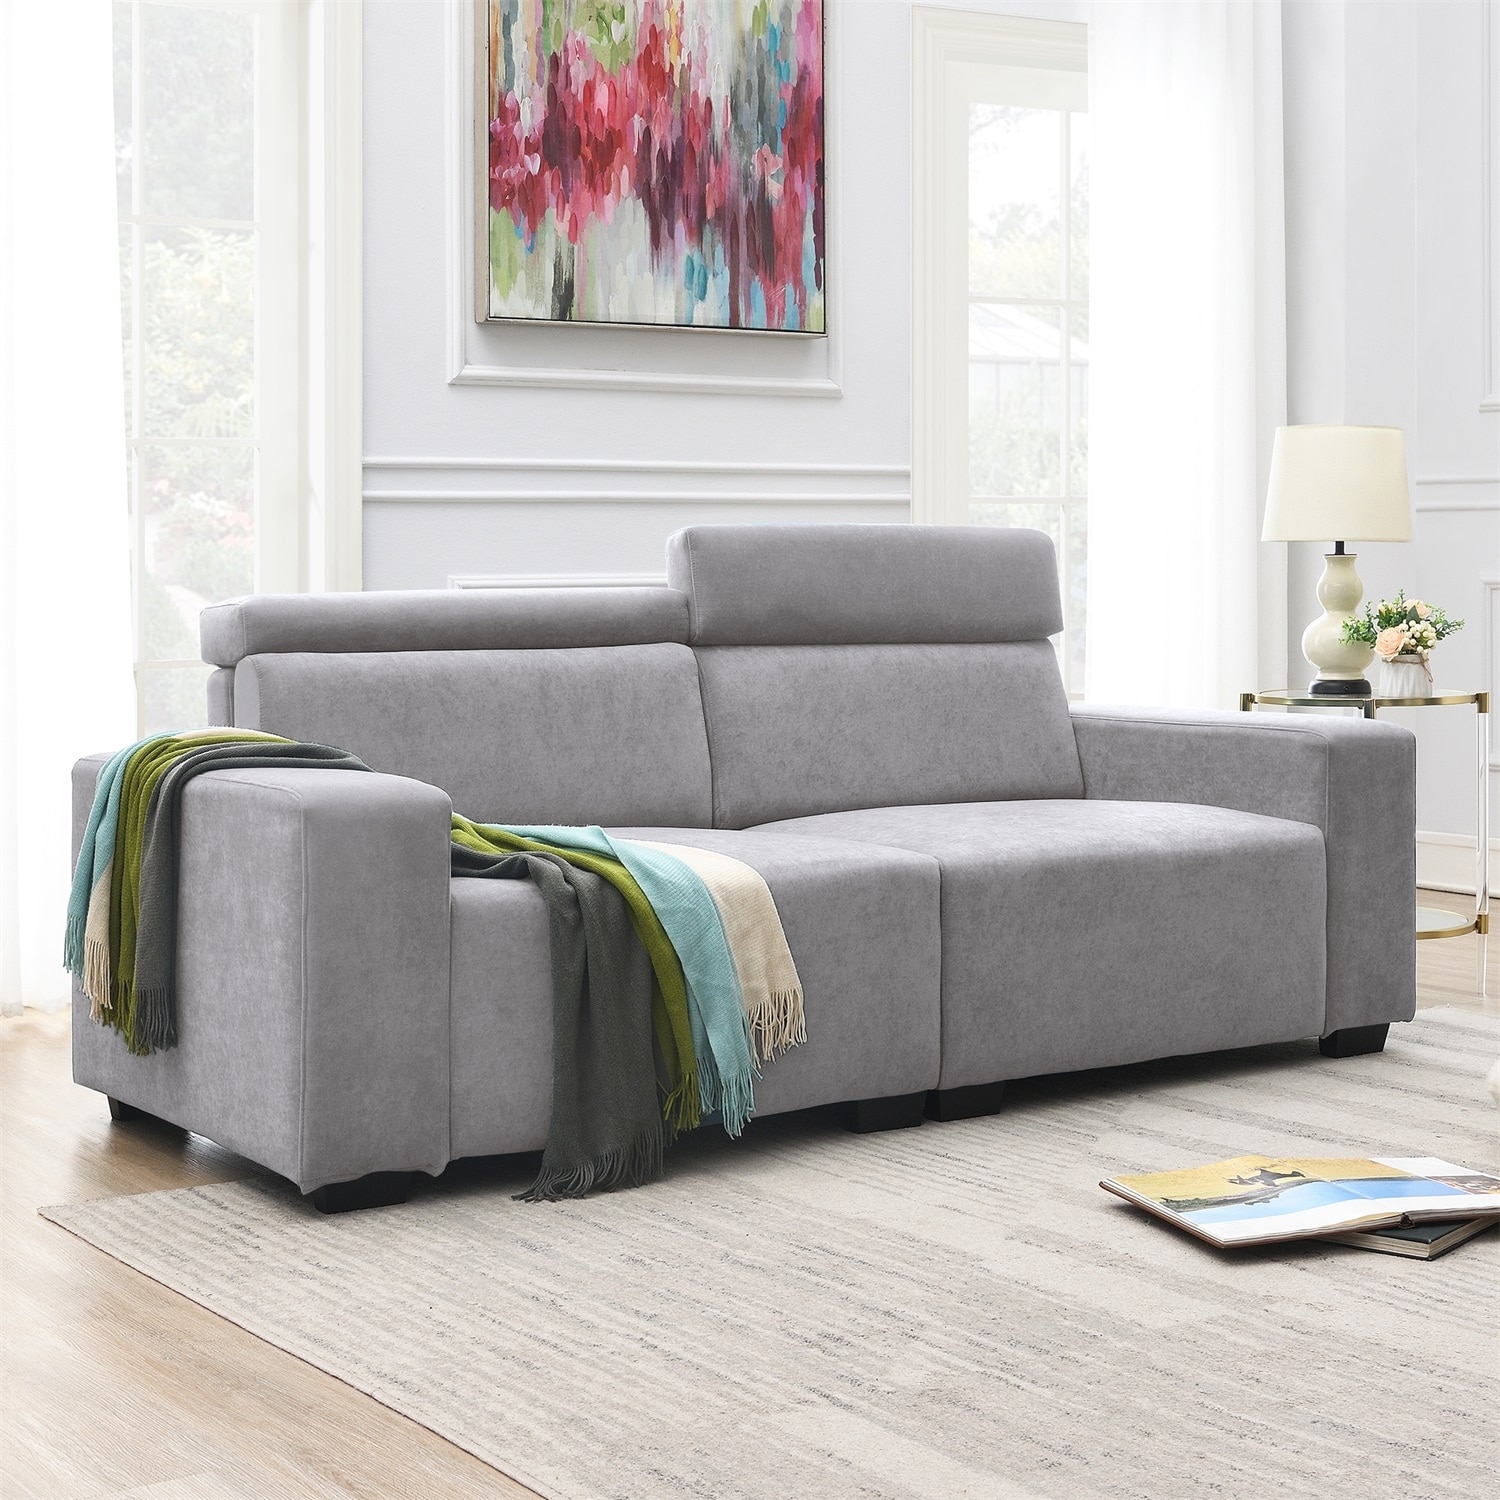 Merax 87*34.2 2-3 Seater Sectional Sofa Couch